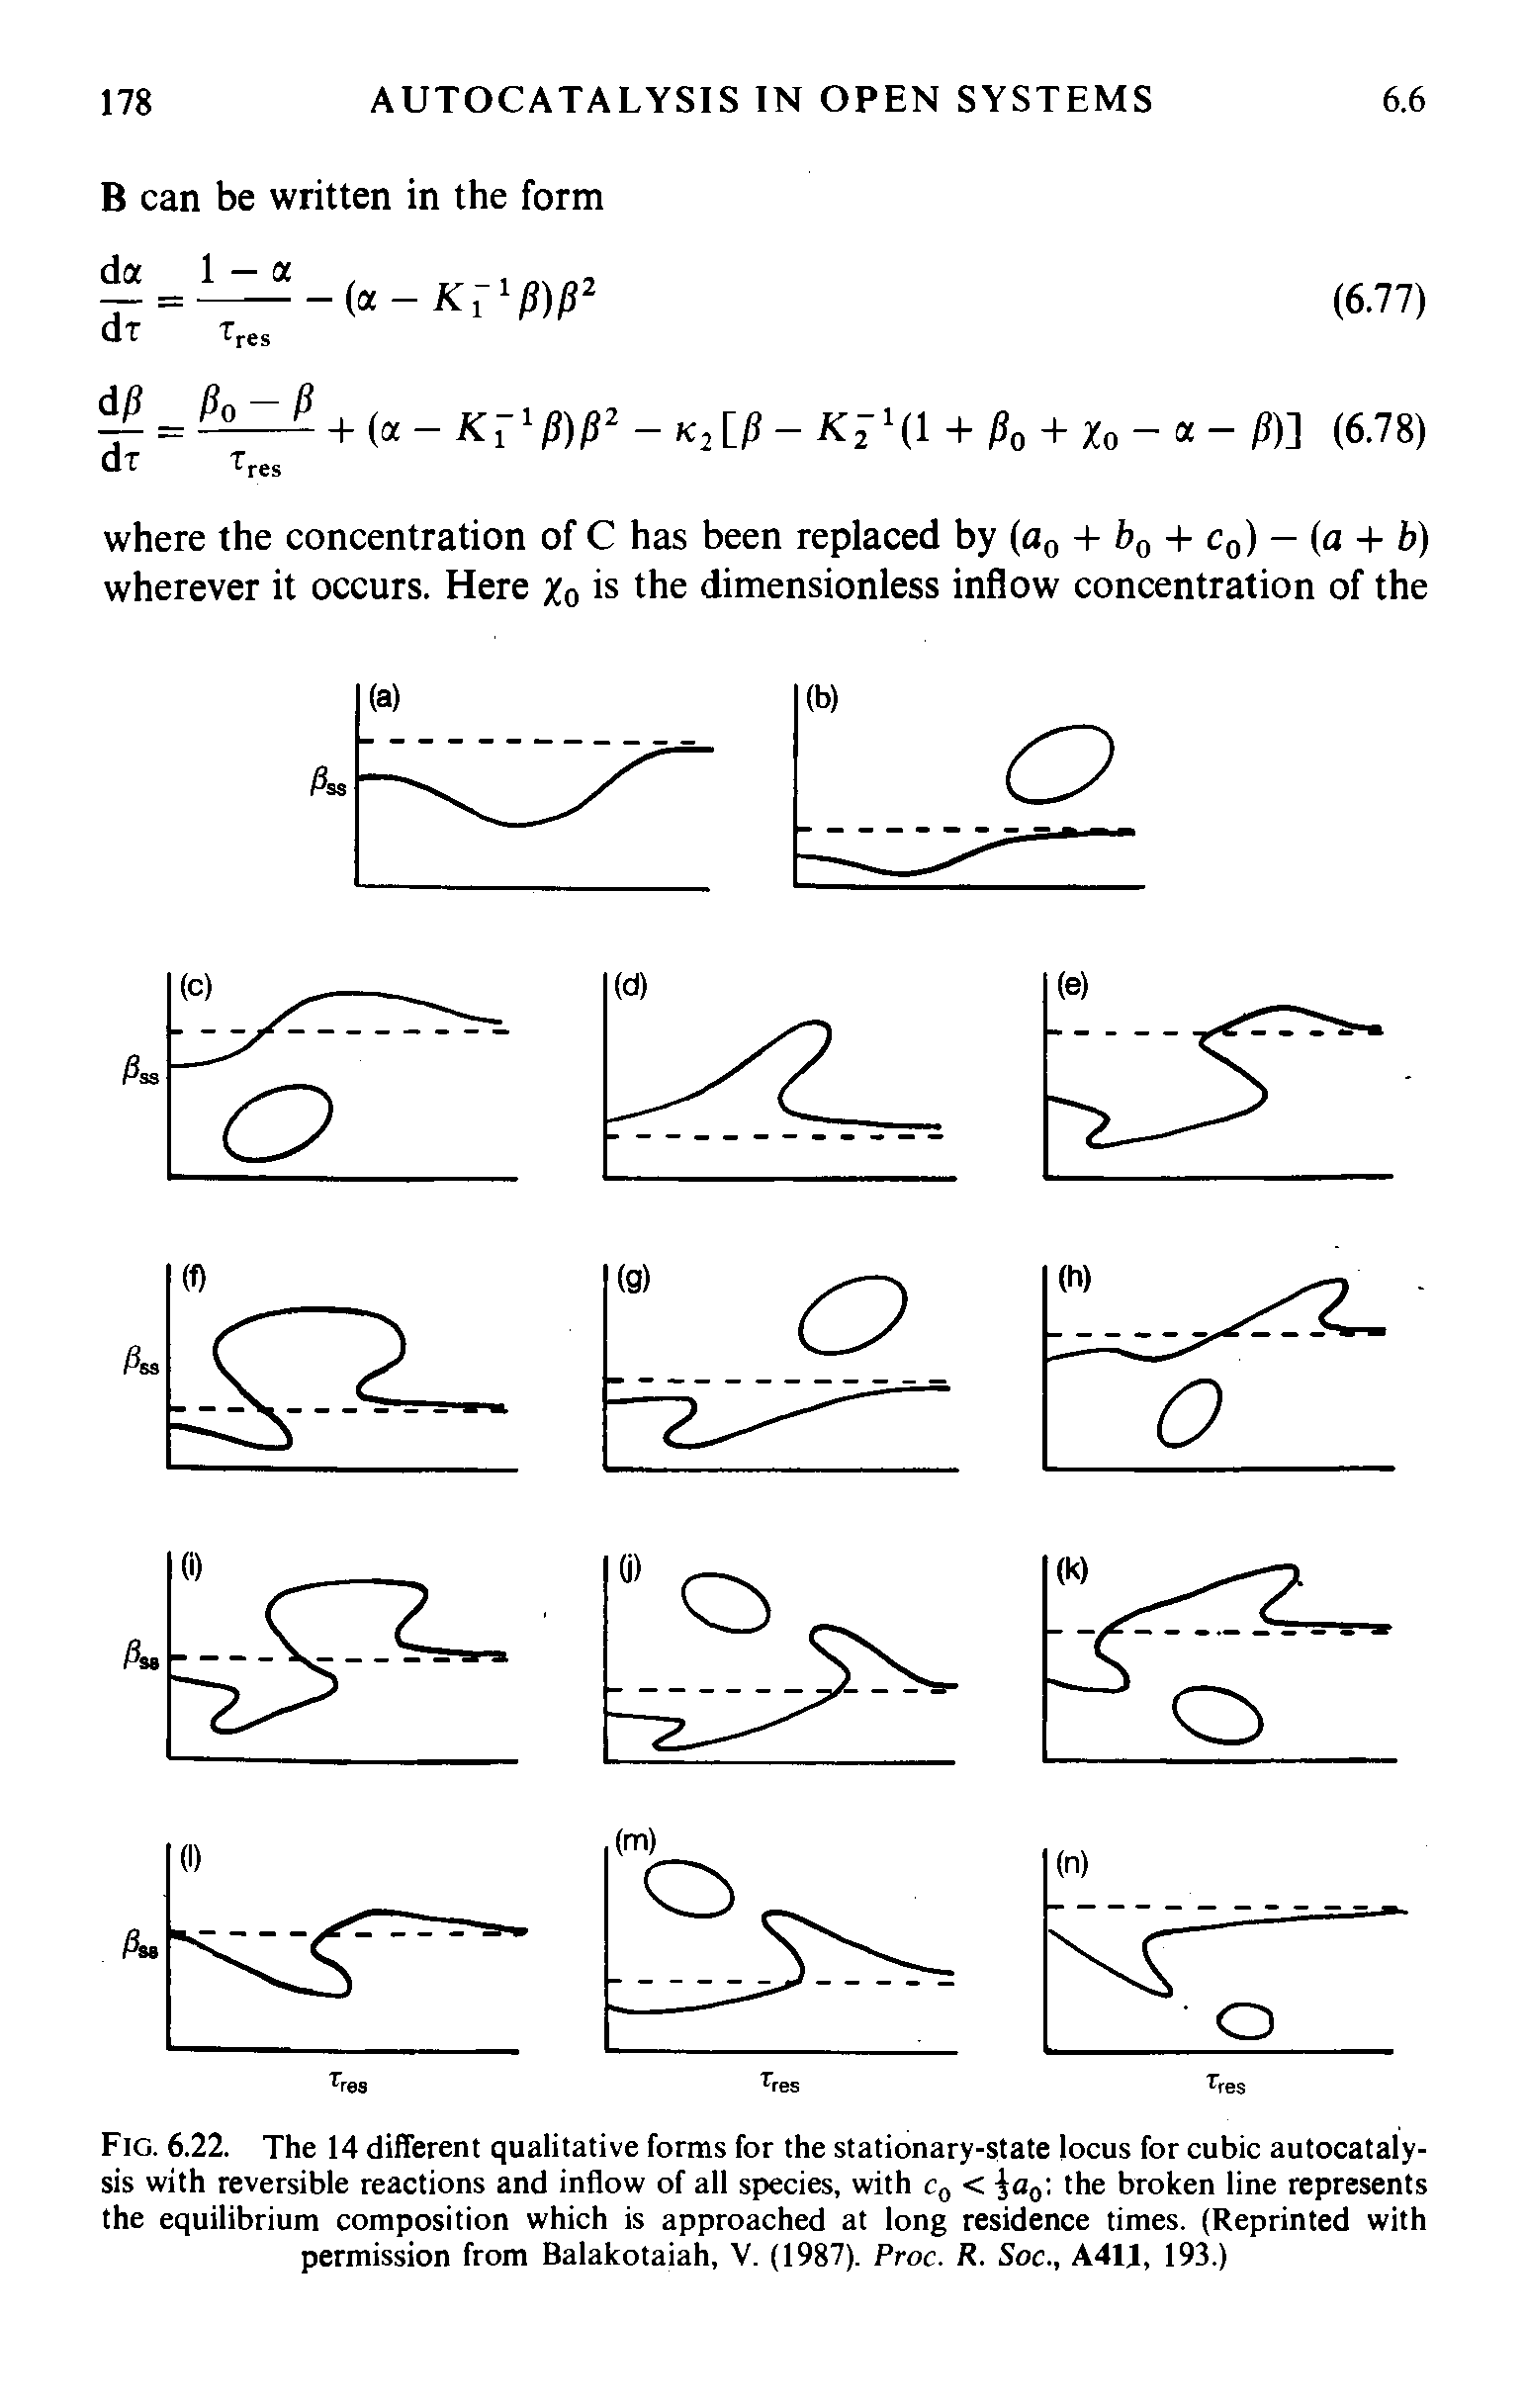 Fig. 6.22. The 14 different qualitative forms for the stationary-state locus for cubic autocatalysis with reversible reactions and inflow of all species, with c0 < a0 the broken line represents the equilibrium composition which is approached at long residence times. (Reprinted with permission from Balakotaiah, V. (1987). Proc. R. Soc., A41J, 193.)...